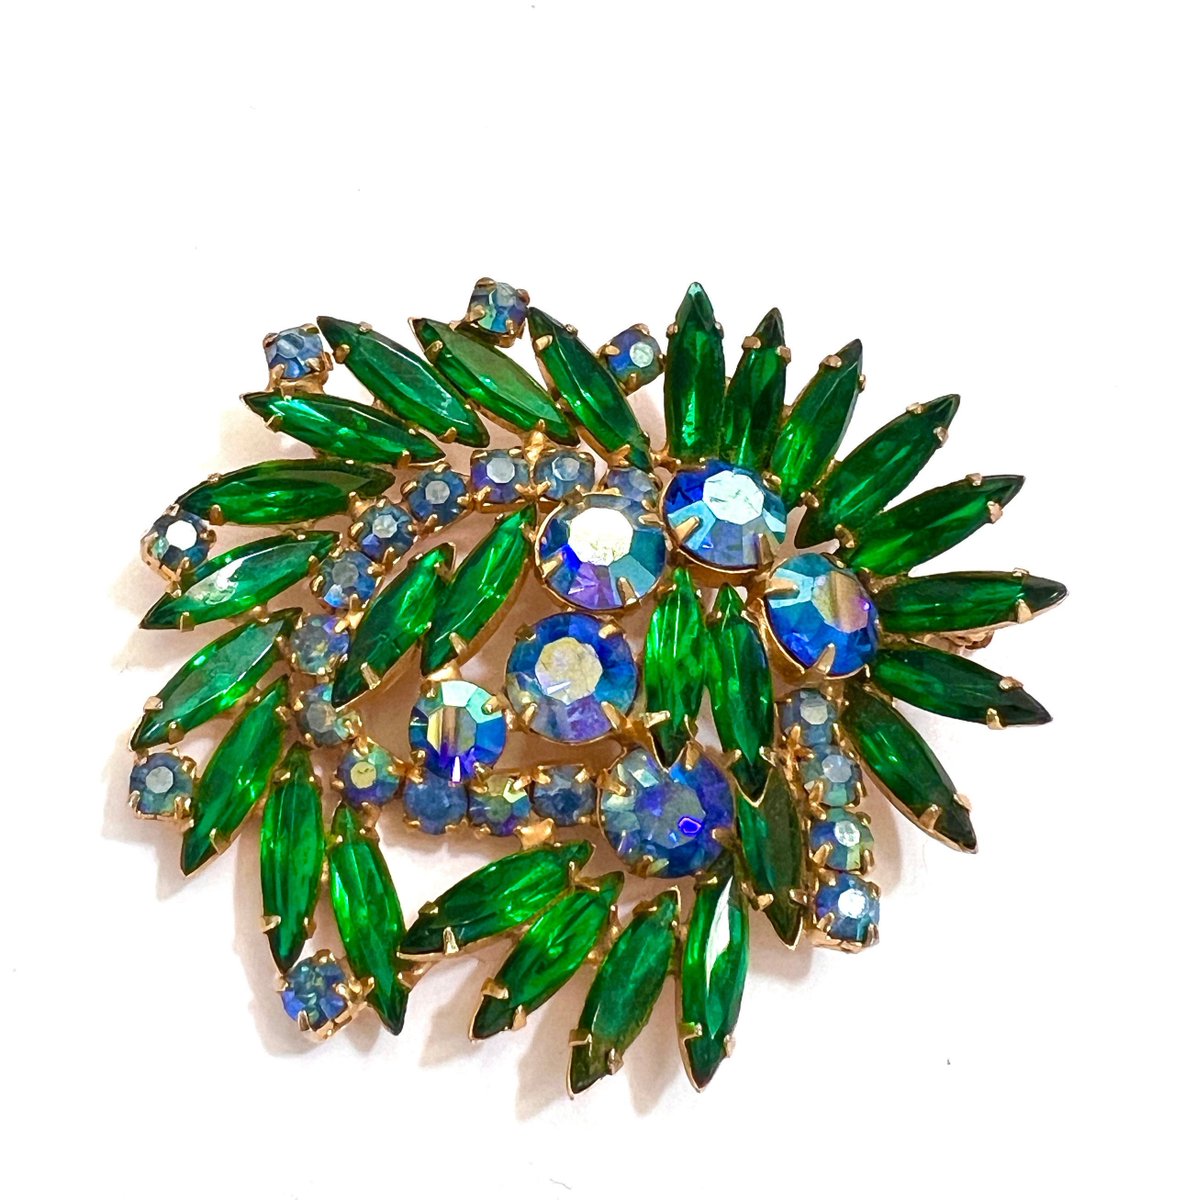 Large Juliana Green & Blue Rhinestone Brooch Floral Spray Emerald Green Navettes Blue Chaton Accents Gift for Her #JulianaBrooch #LargeJuliana $130.00 ➤ etsy.com/listing/171357…